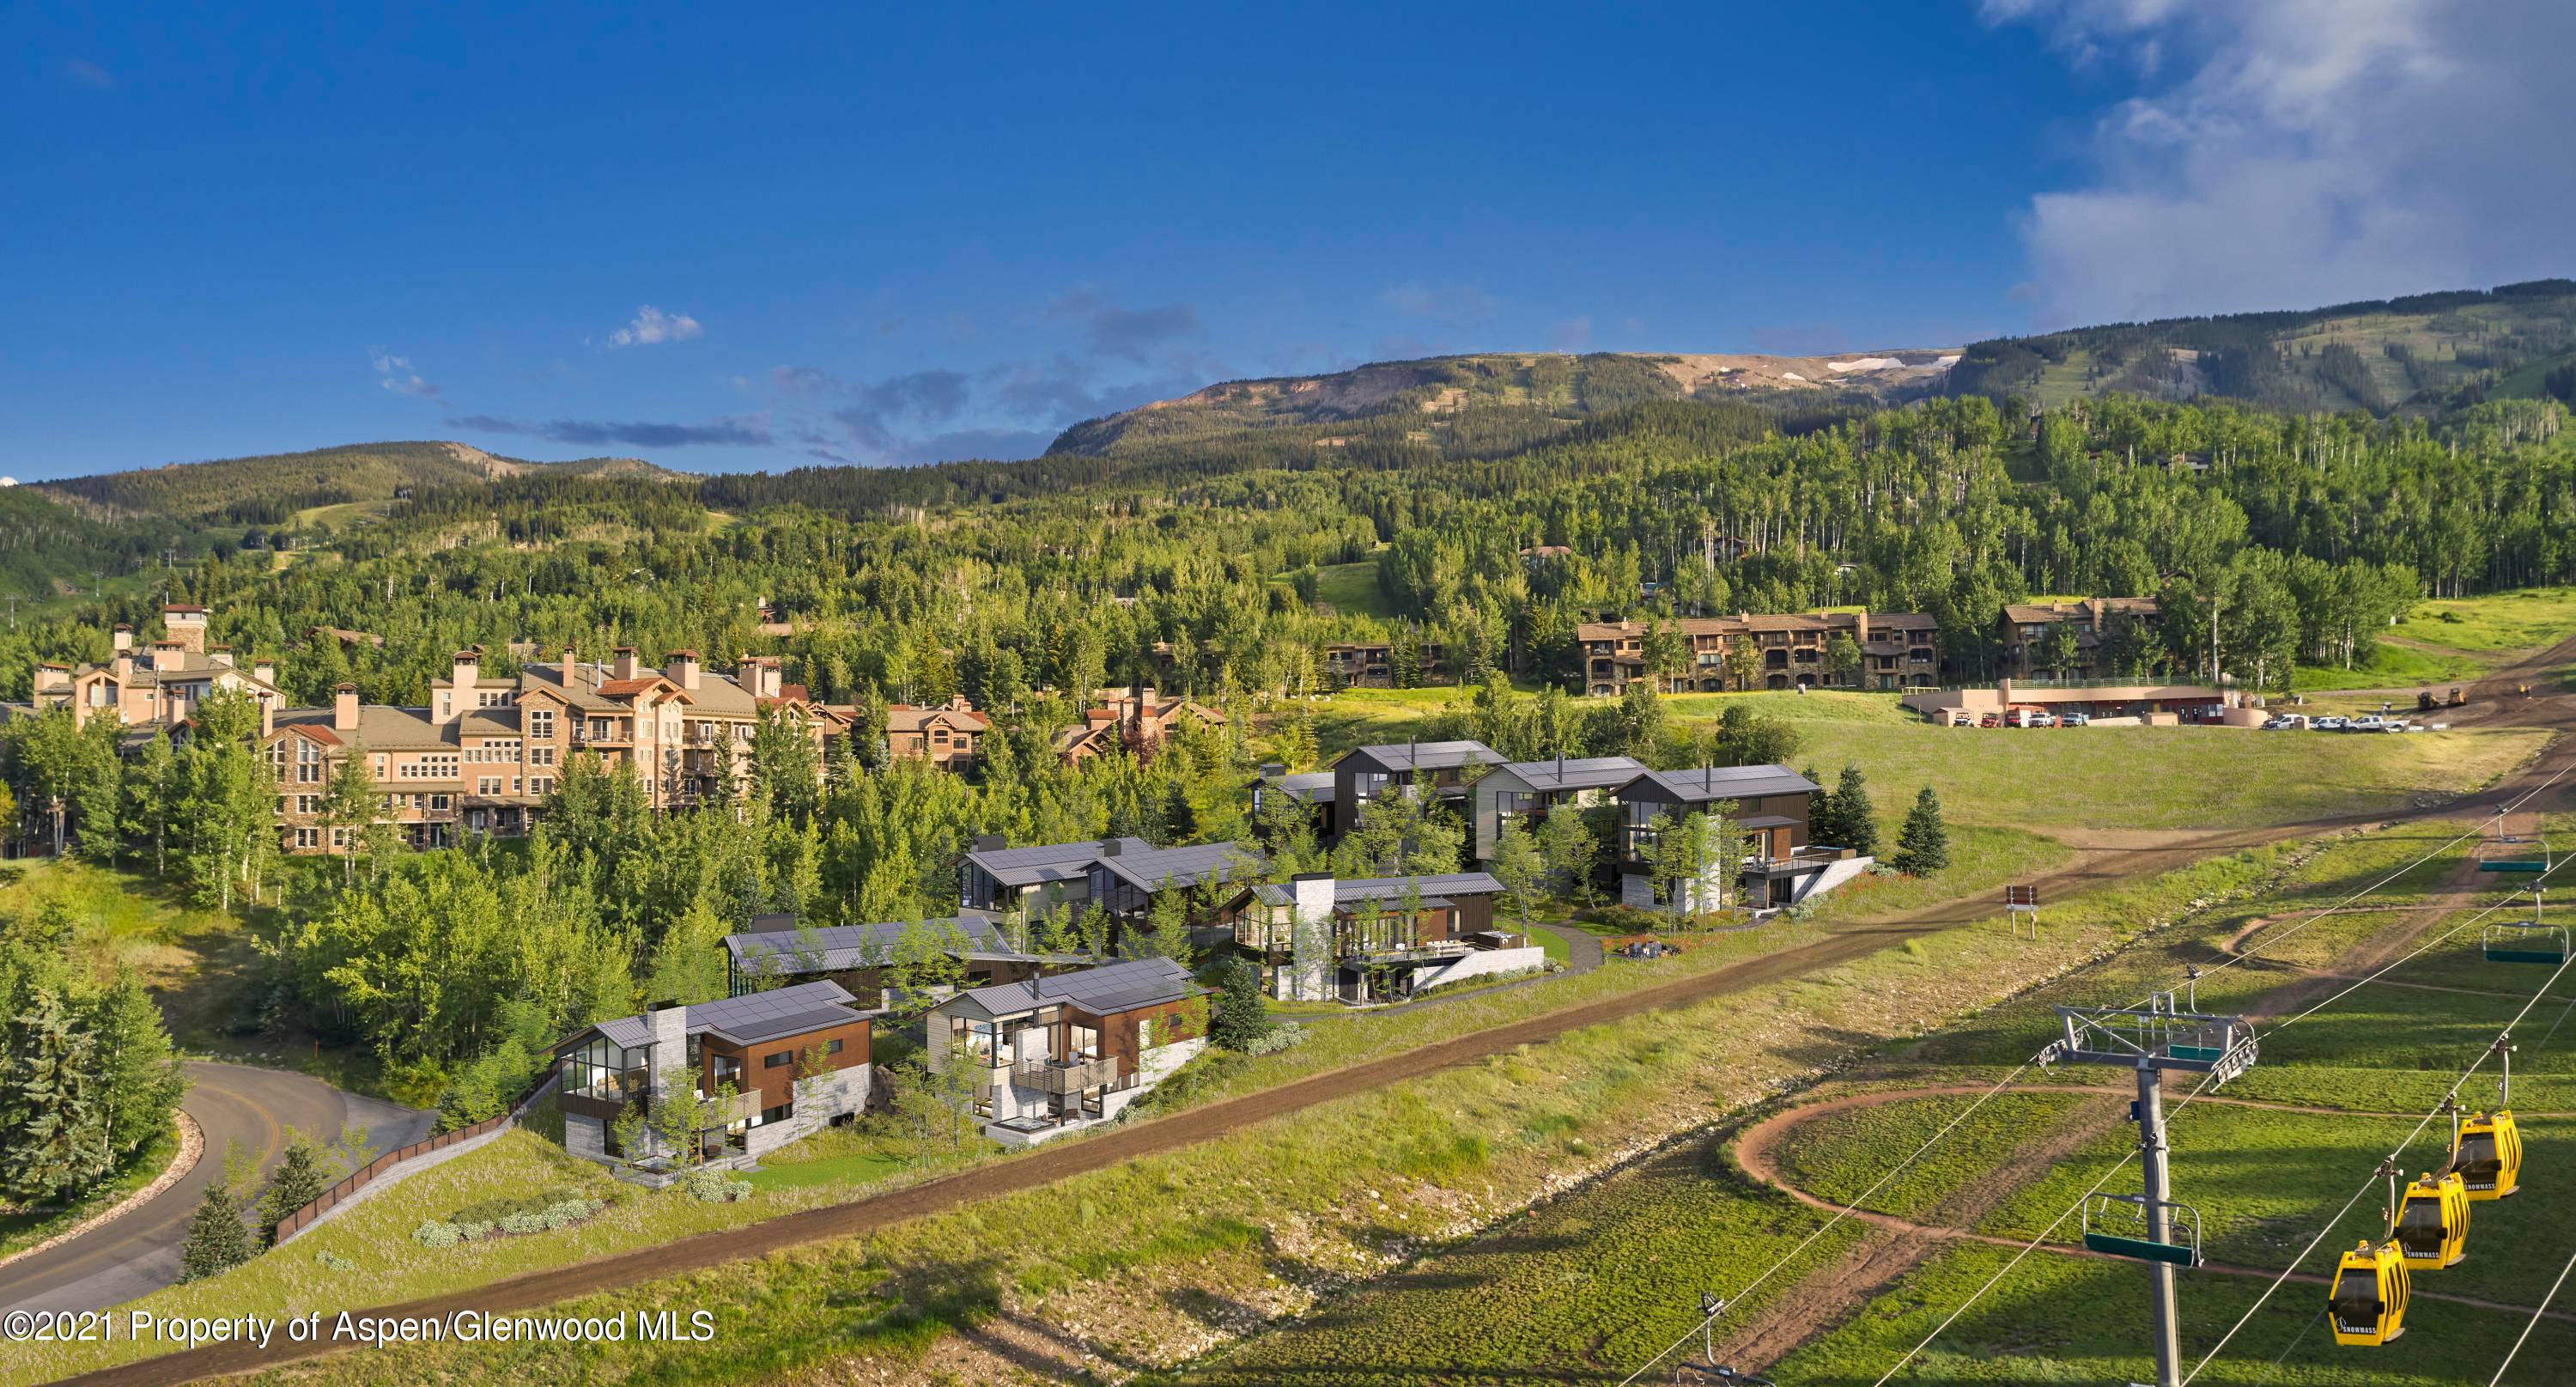 Located right on the ski way, this 3 bedroom home is adjacent to the community's Aspen Grove, with floor to ceiling windows that showcase the landscape.